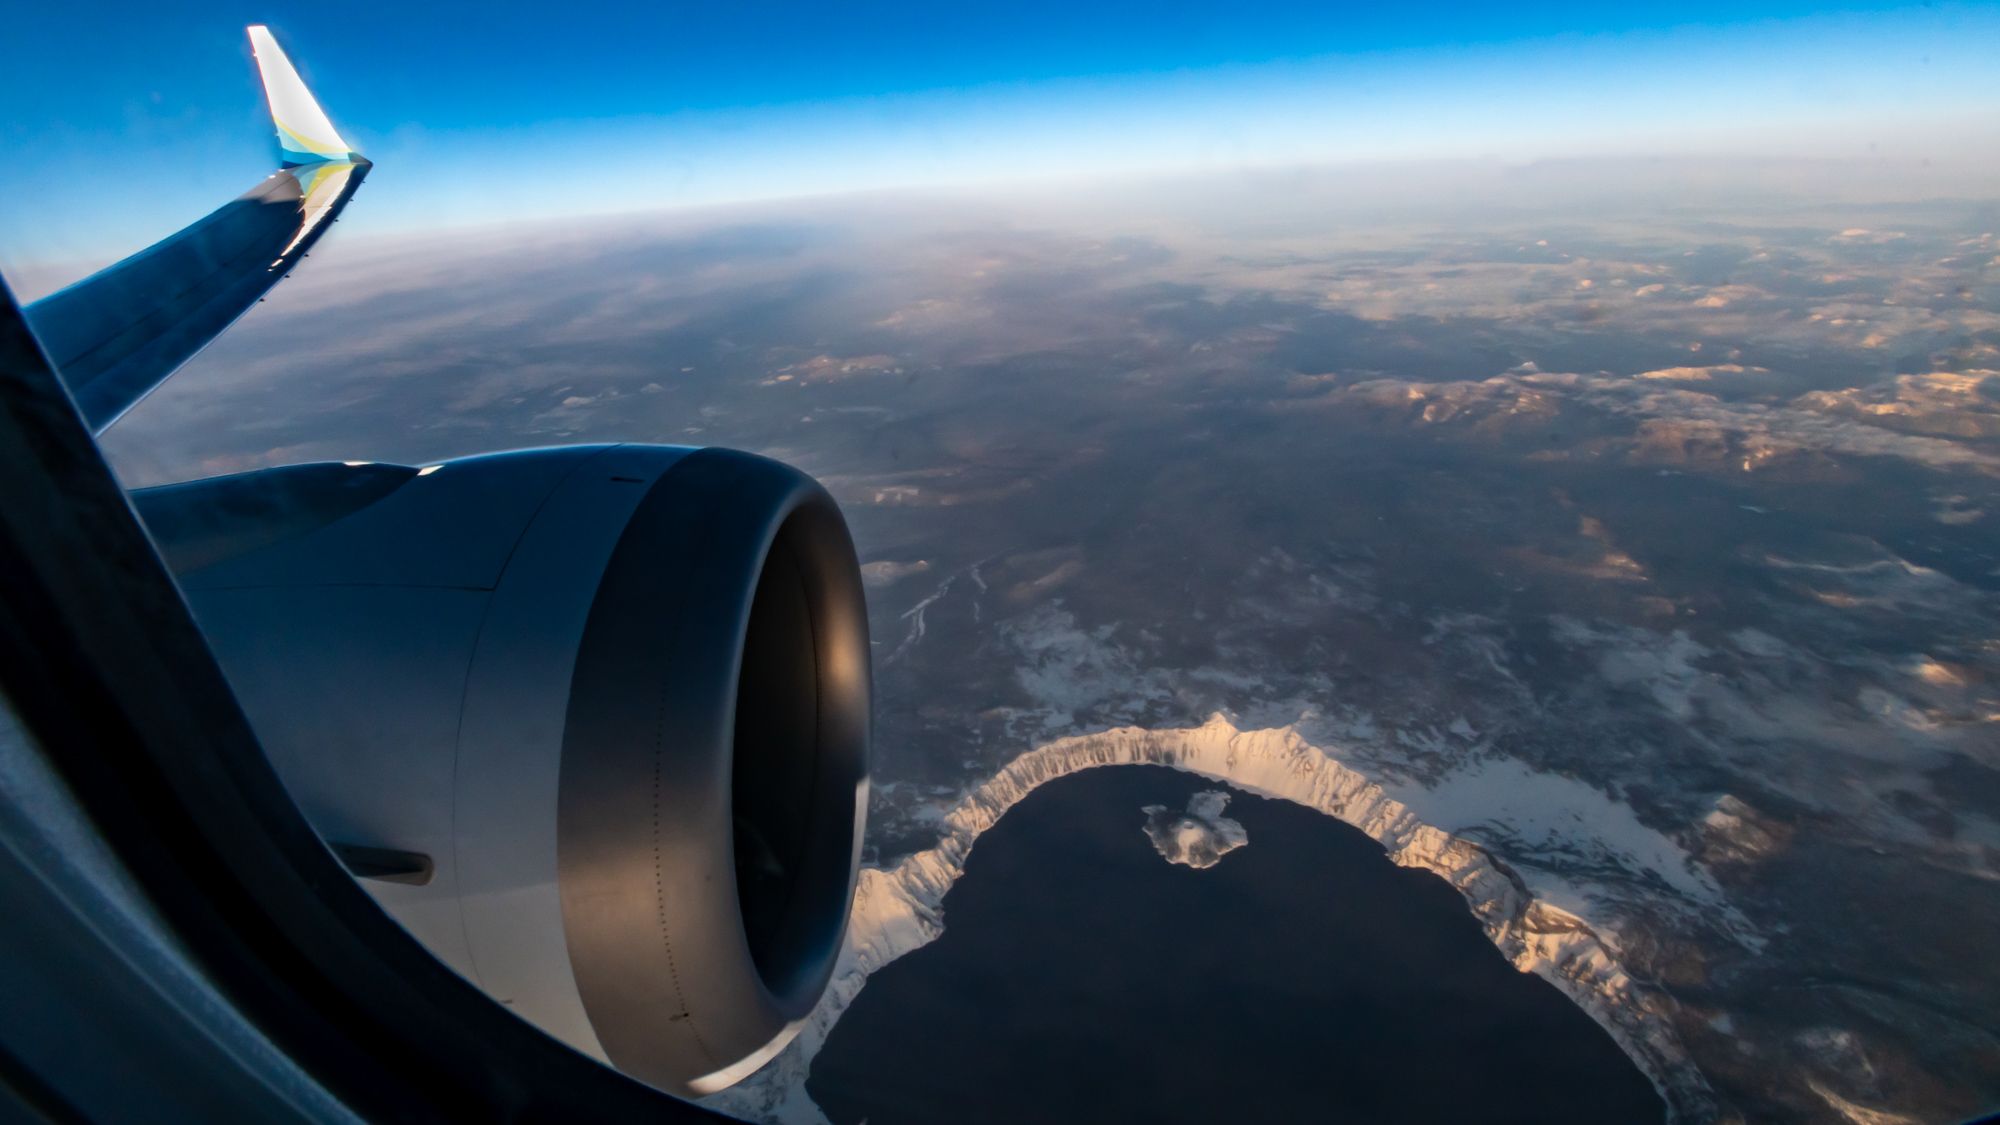 737 MAX 9 Wing Over Crater Lake With the CFM International LEAP-1B engine in the frame